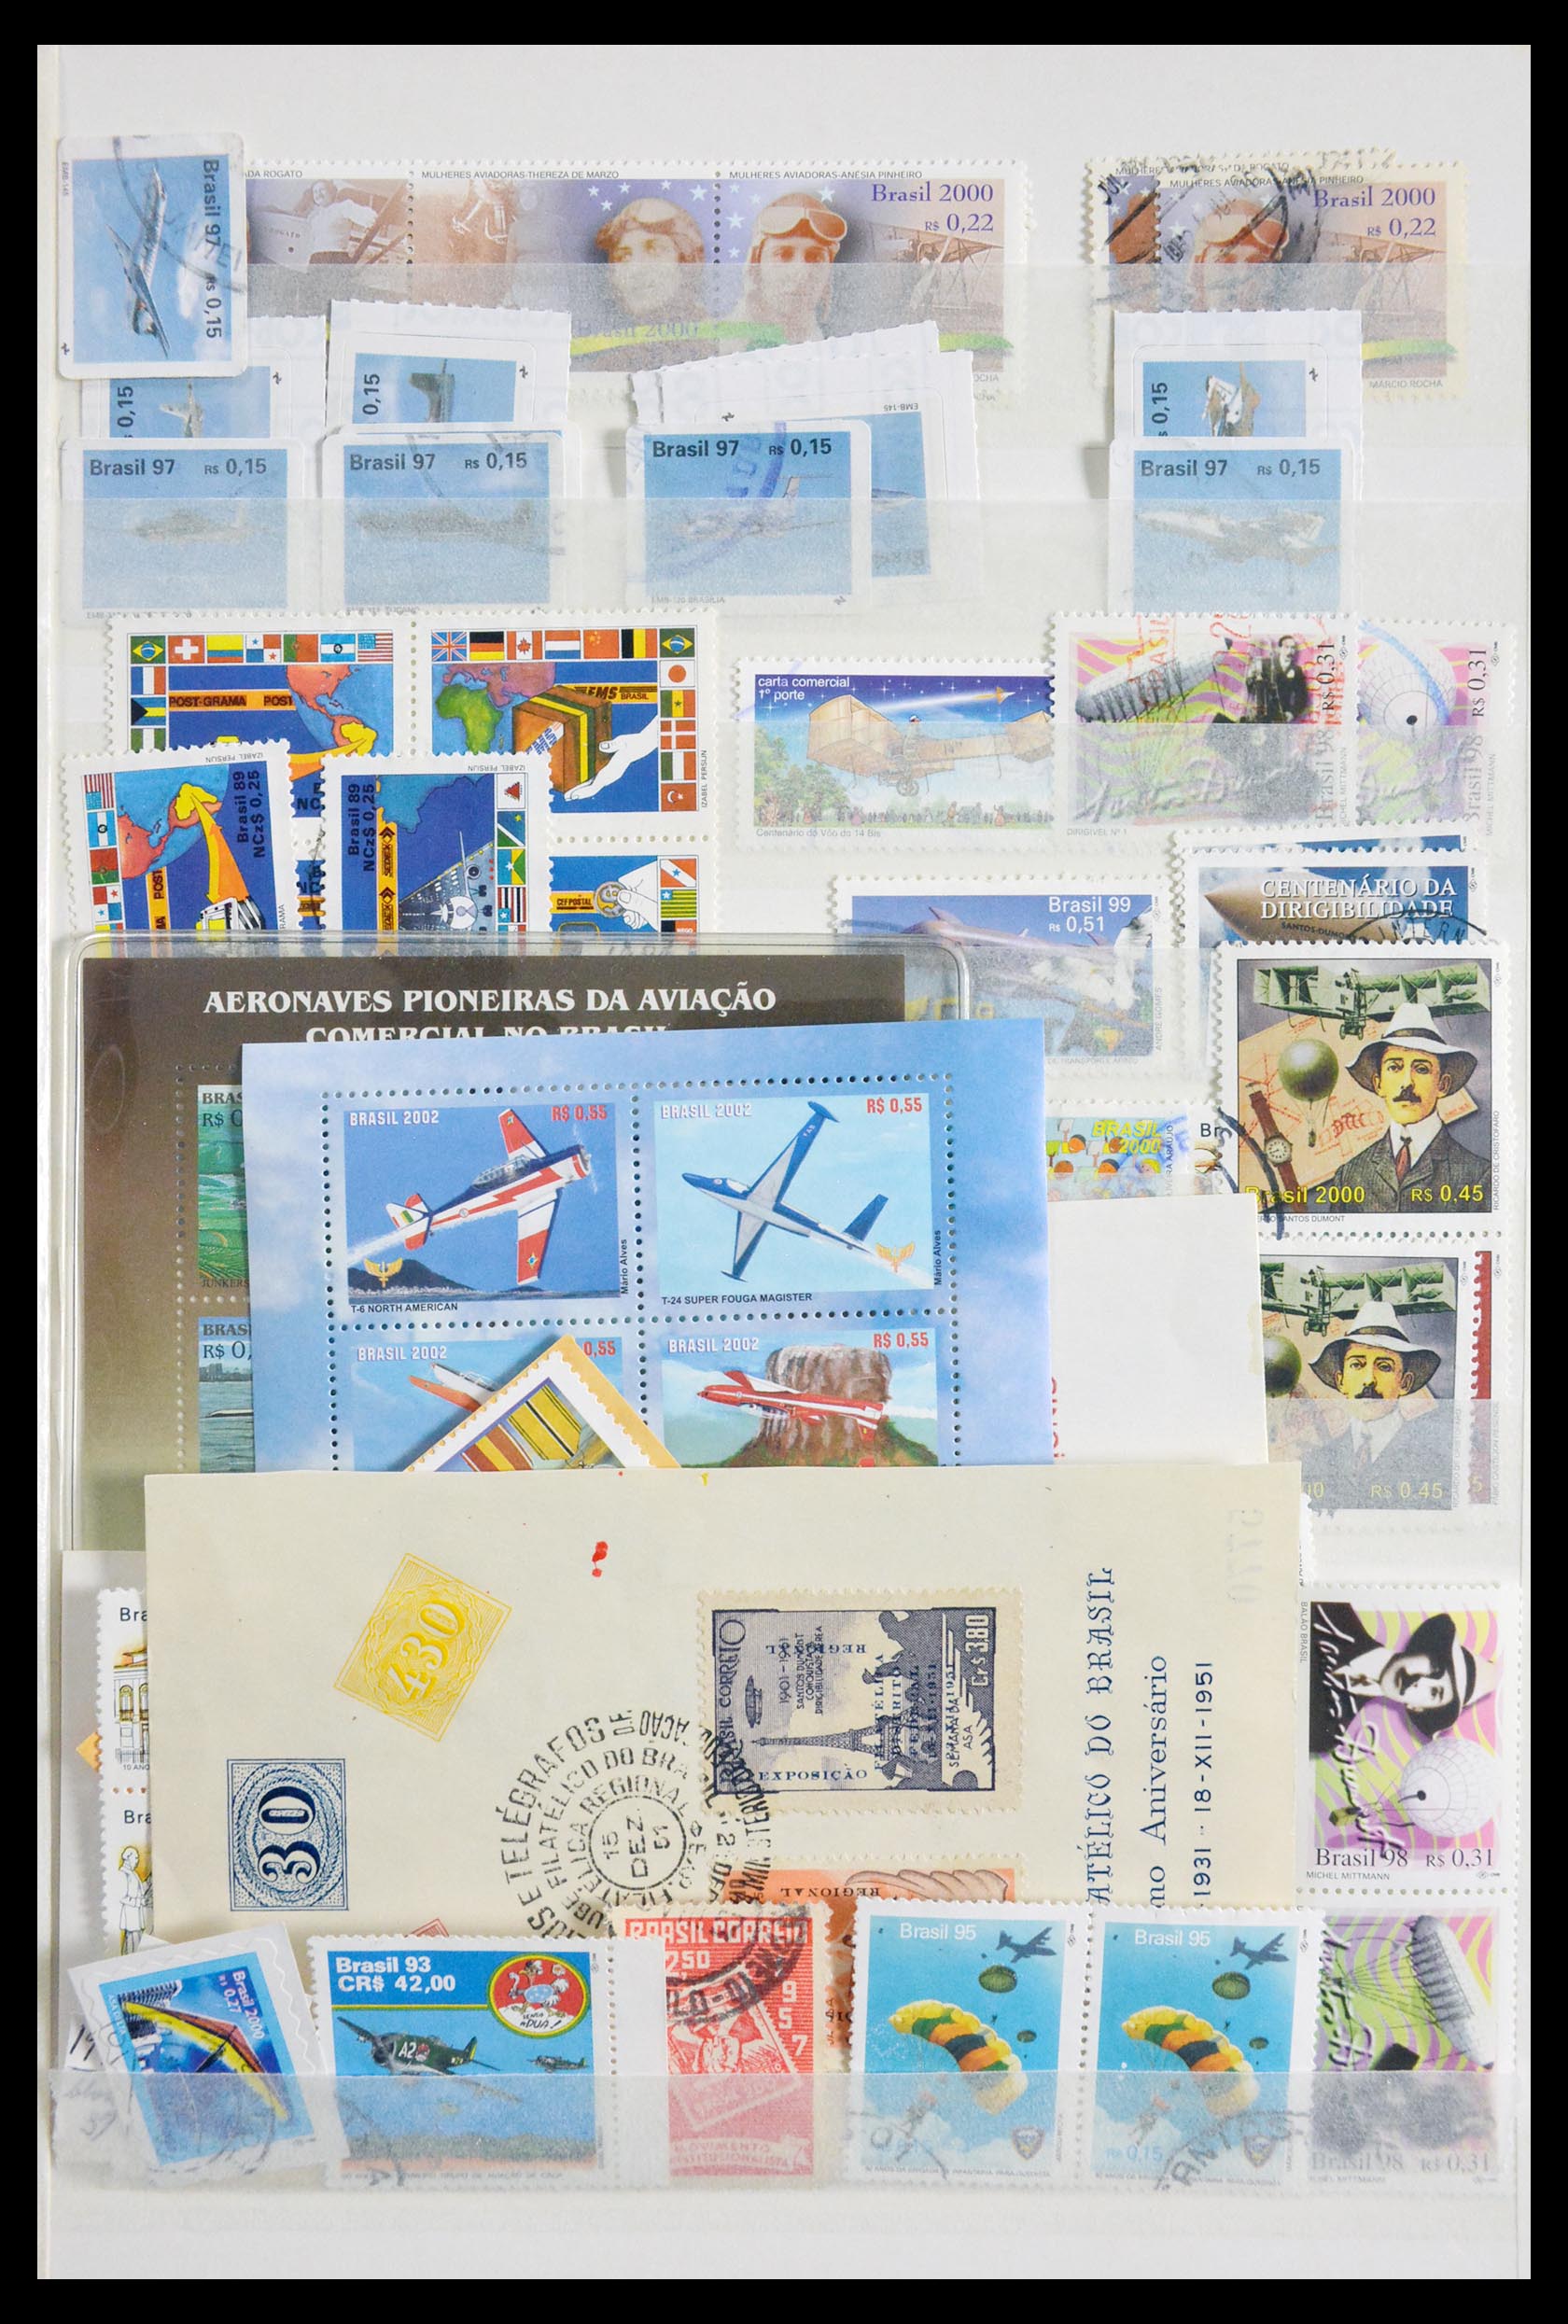 29917 033 - 29917 Latin America airmail stamps.